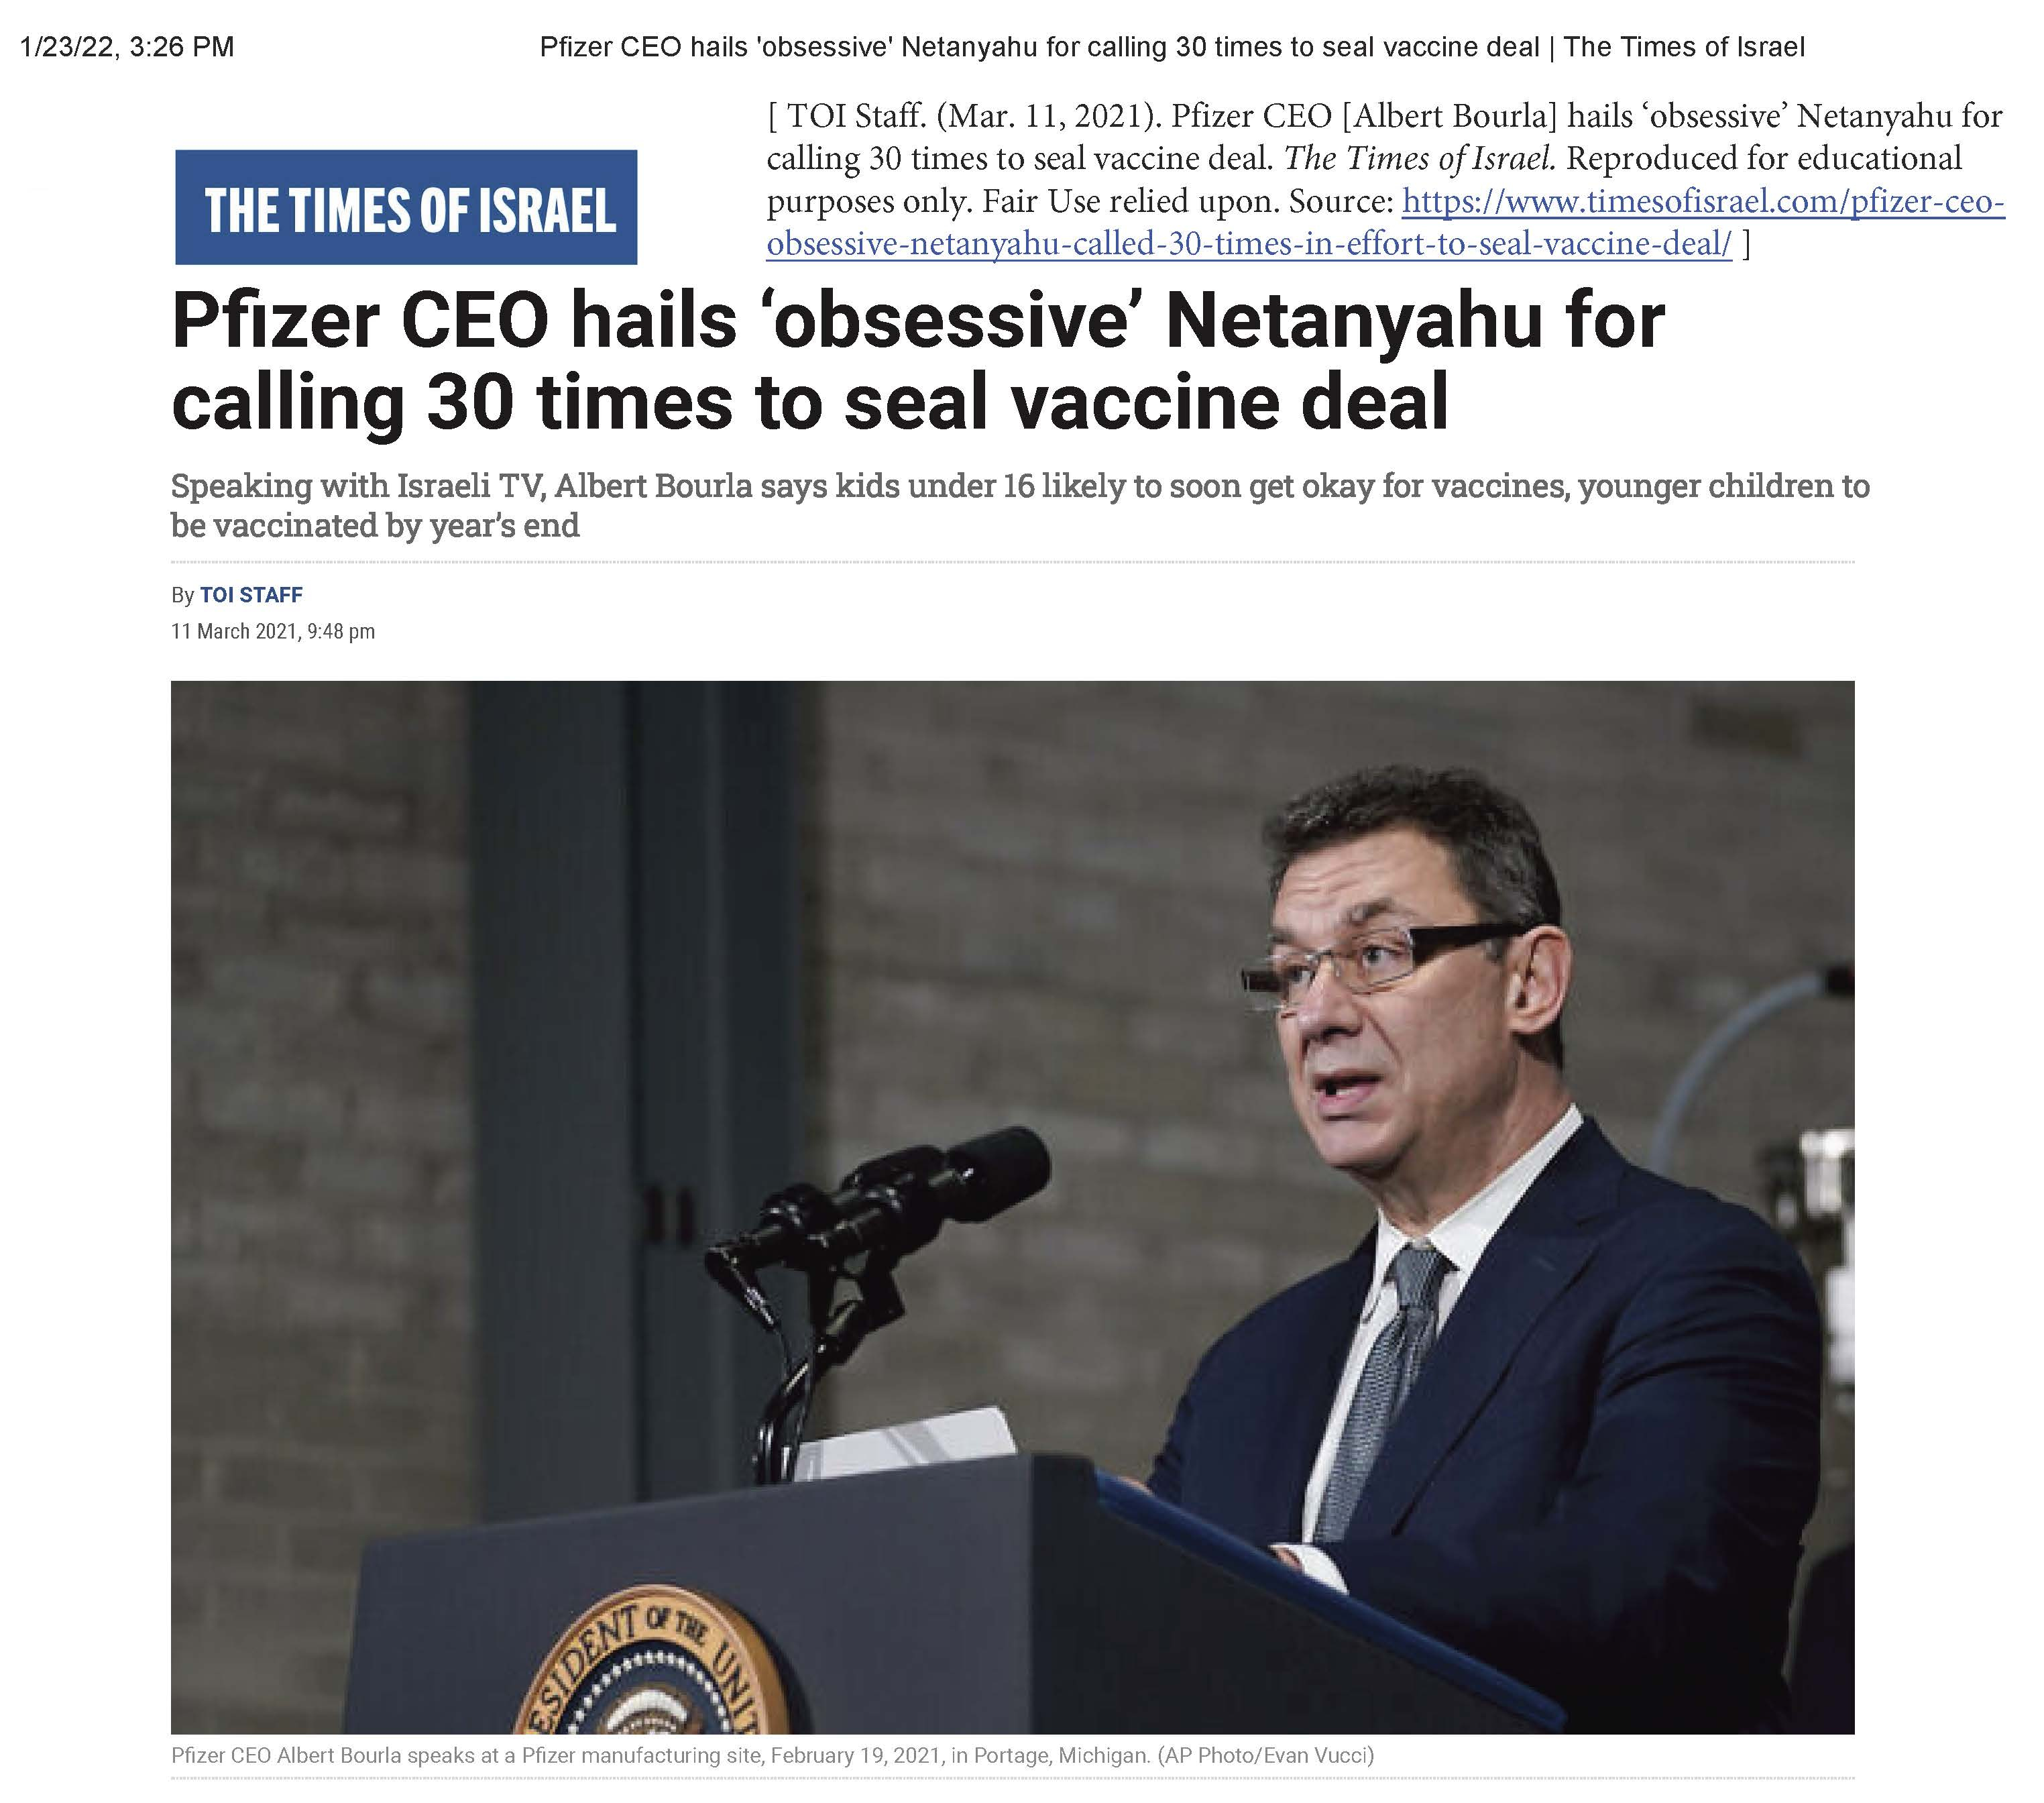 TOI Staff. (Mar. 11, 2021). Pfizer CEO [Albert Bourla] hails ‘obsessive’ Netanyahu for calling 30 times to seal vaccine deal. The Times of Israel.